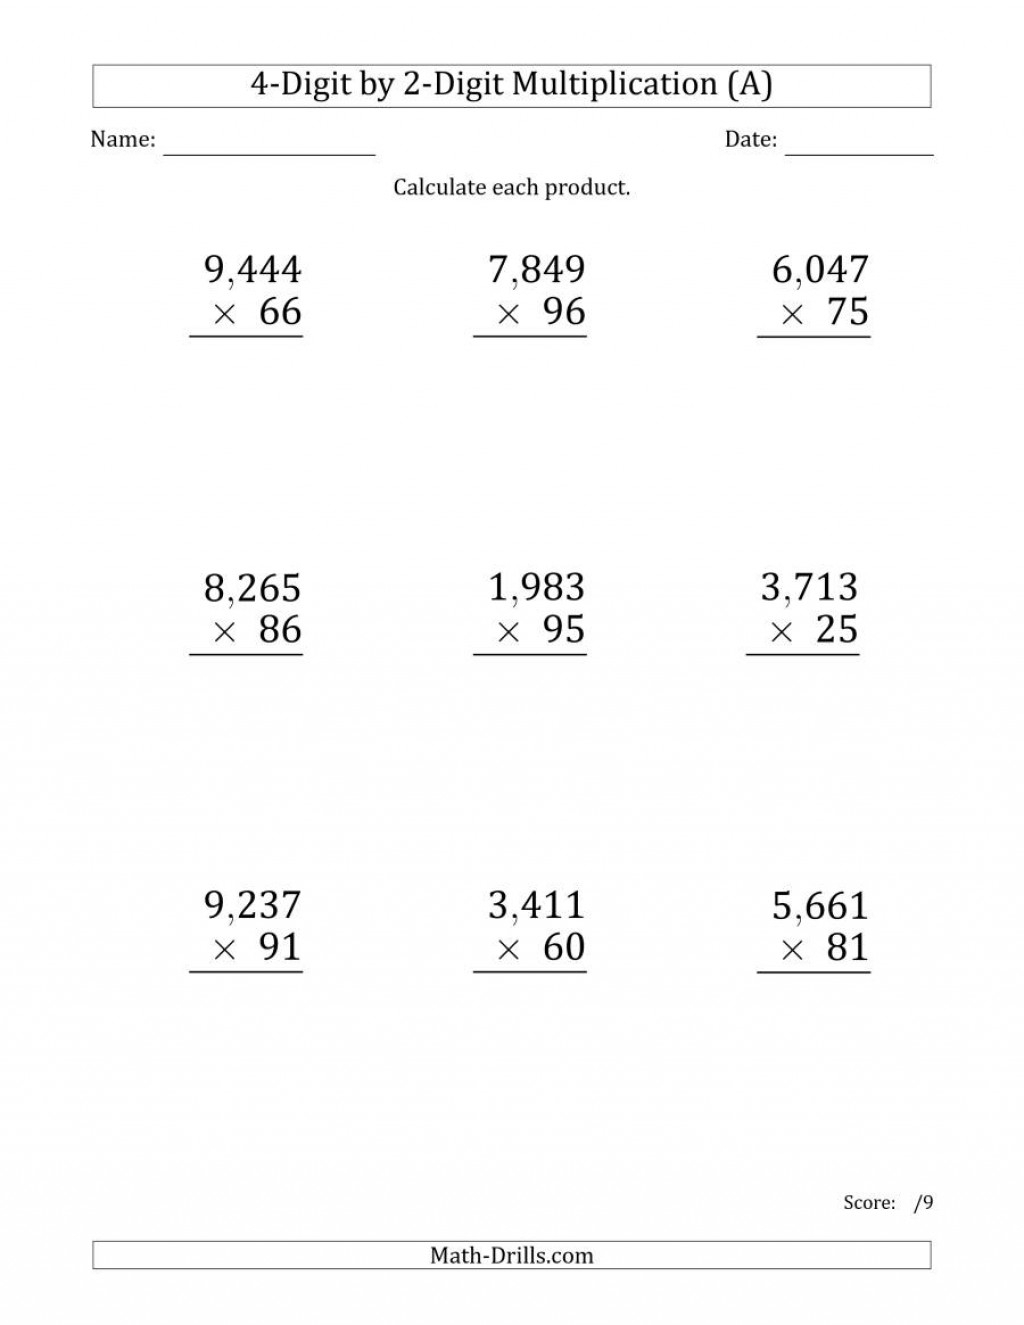 multiply-2-digits-by-2-digits-worksheet